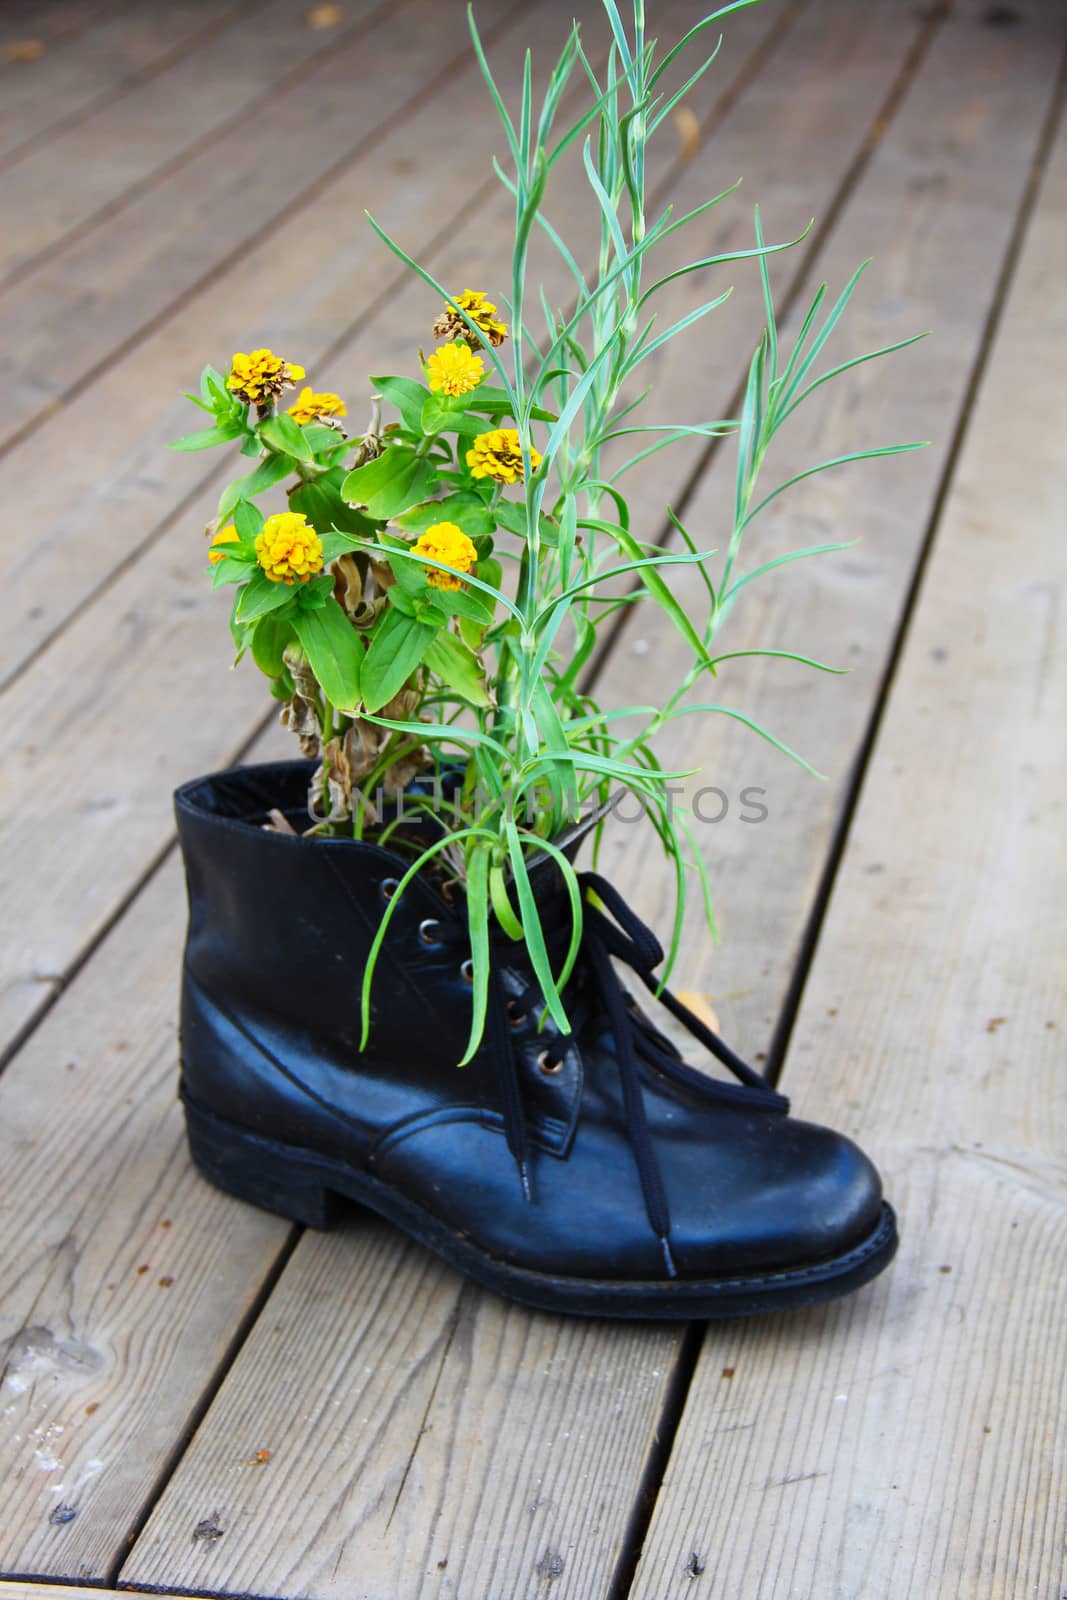 Flower growing from old boot used as pot